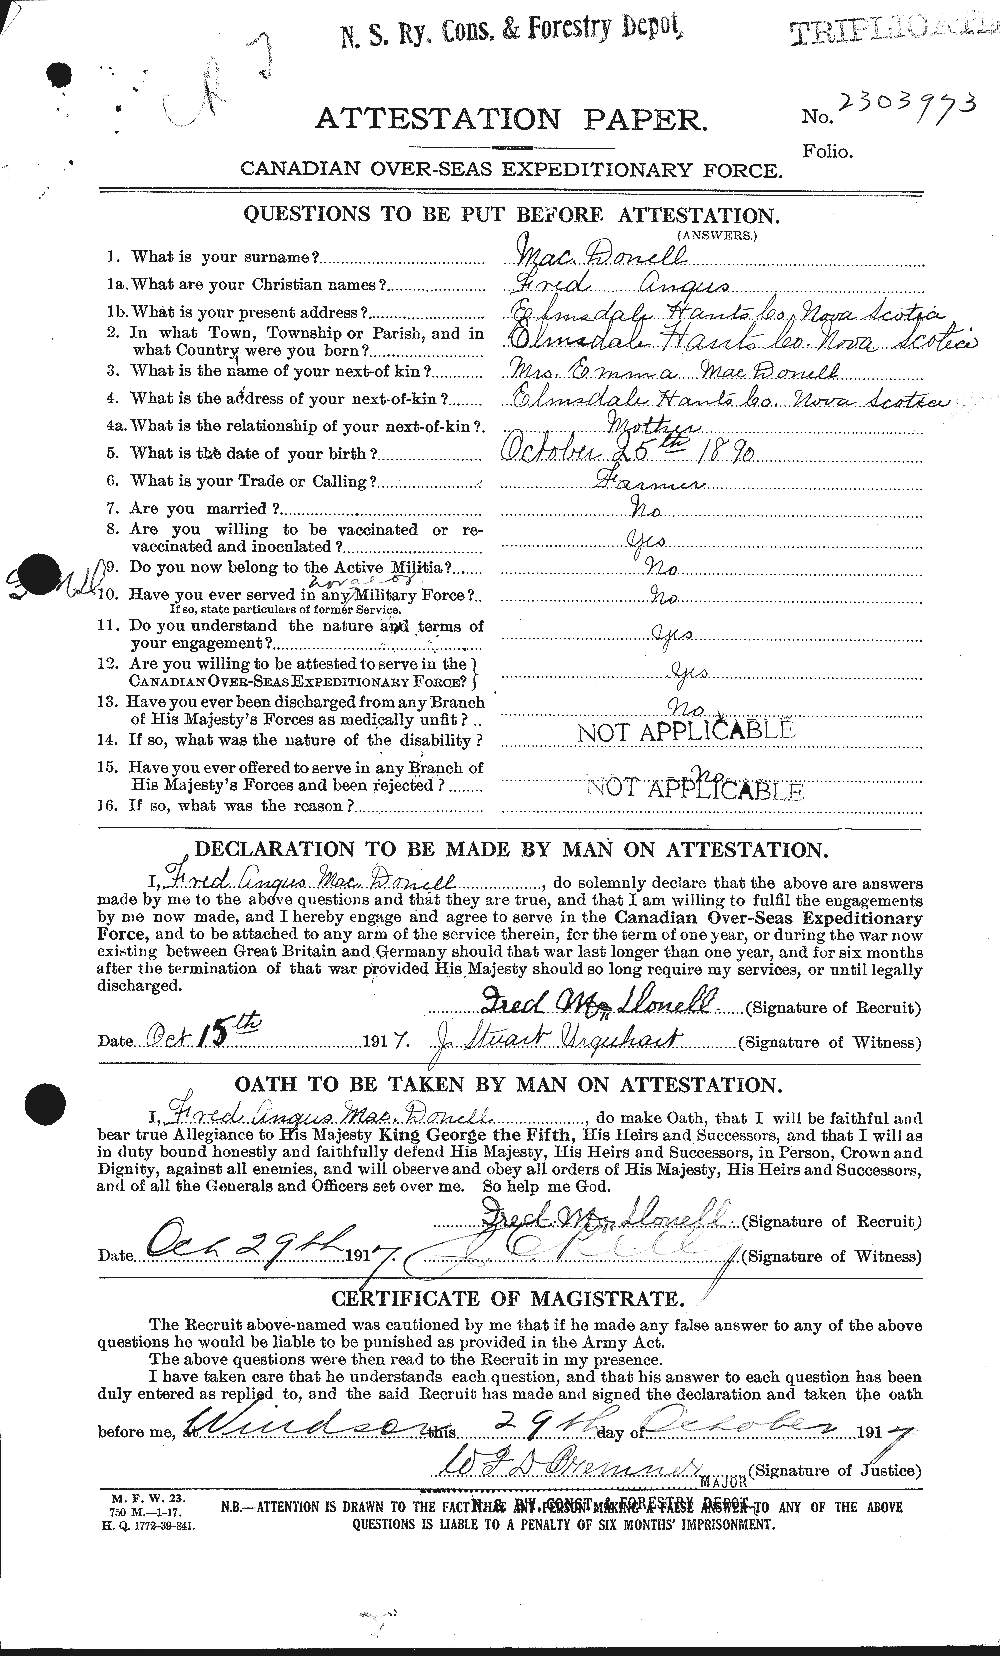 Personnel Records of the First World War - CEF 521436a